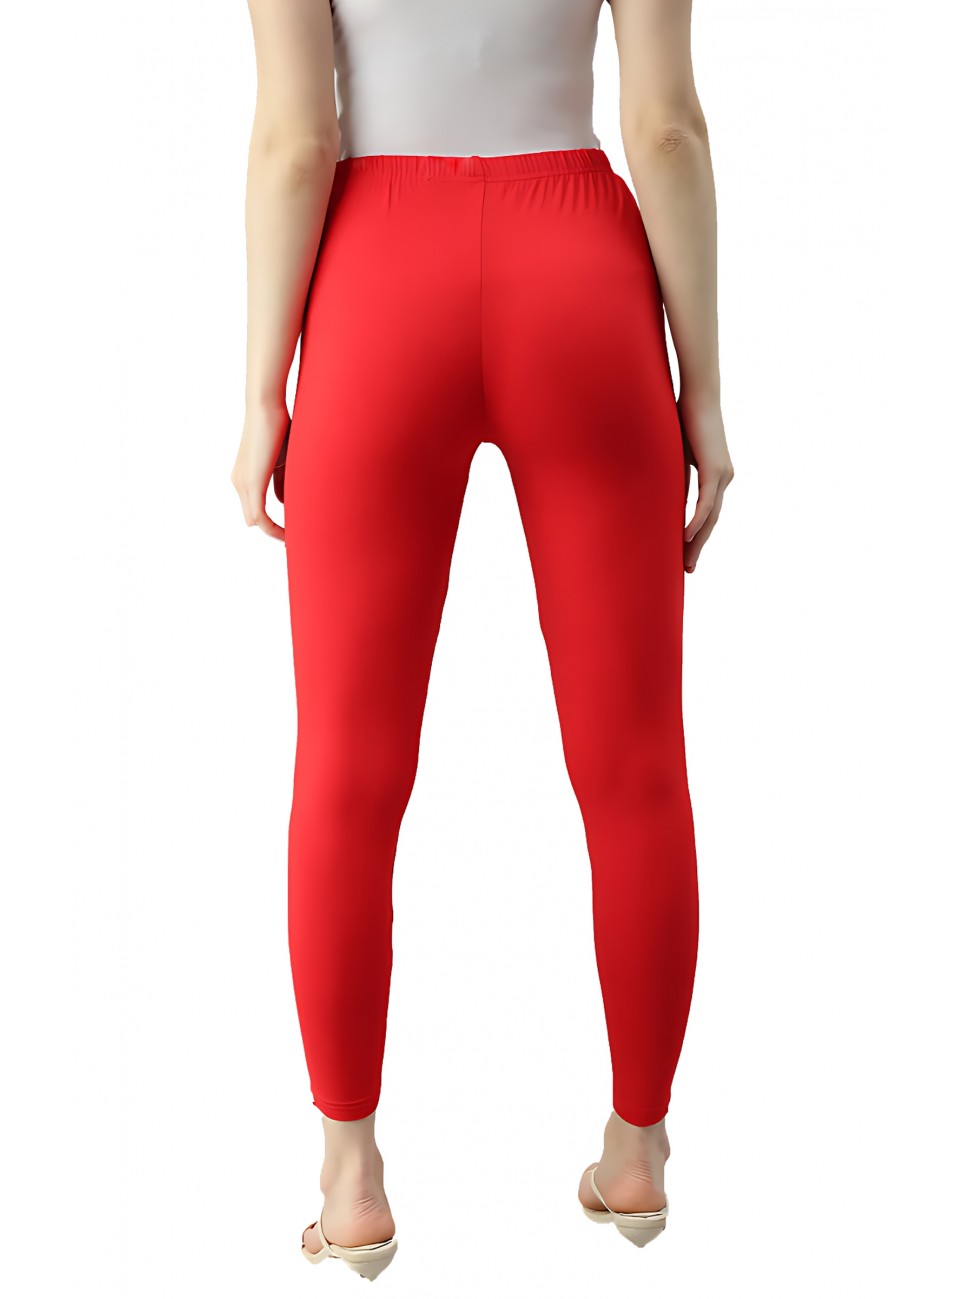 MIRCHI & PEPPER 95% Cotton And 5% Spandex Ankle Length Leggings at Rs 200  in Mumbai